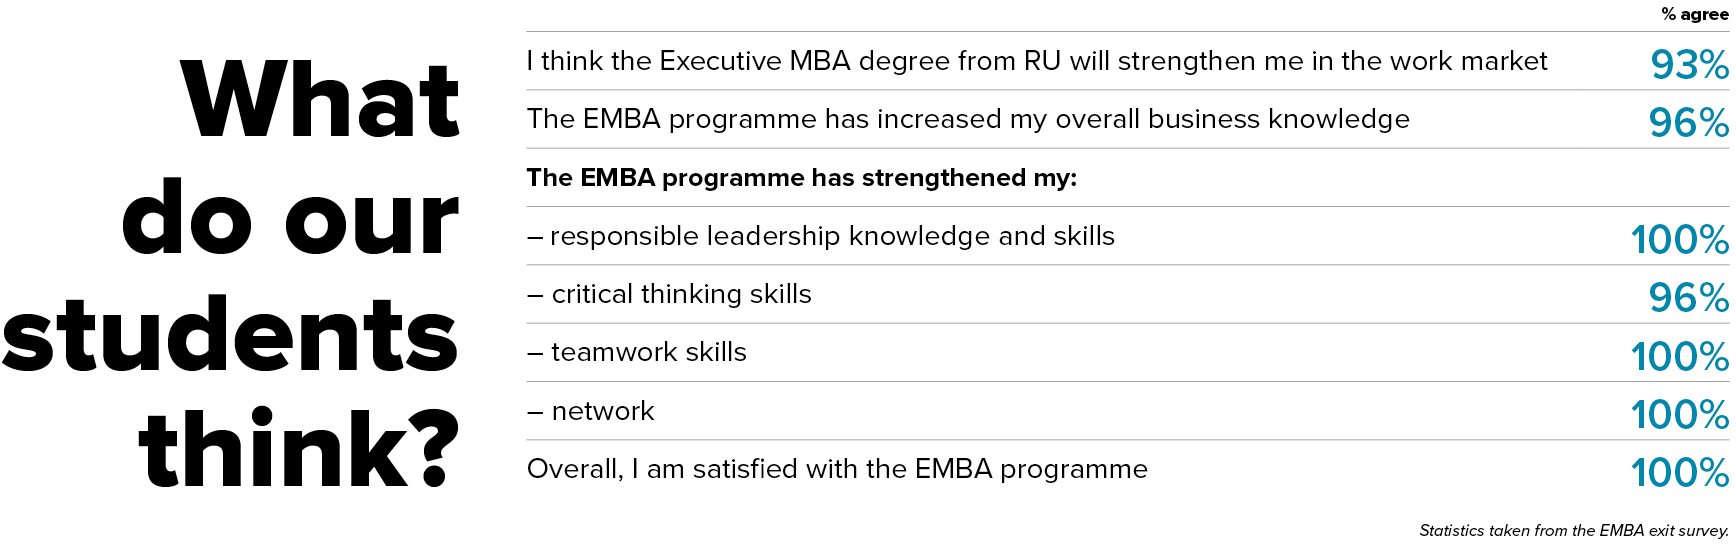 Executive MBA stats for students